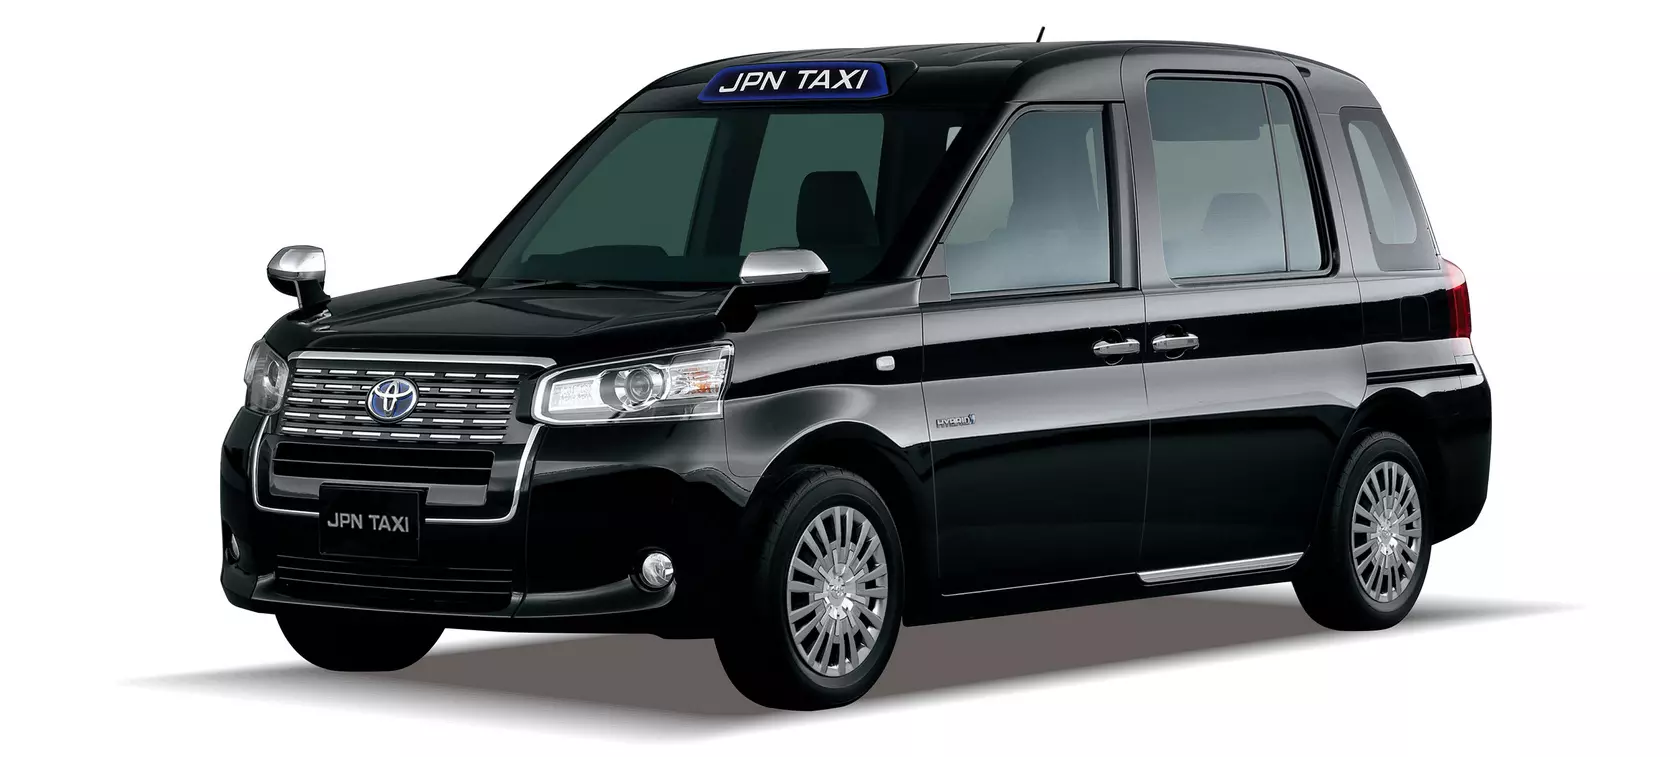 Toyota JPN Taxi goes official